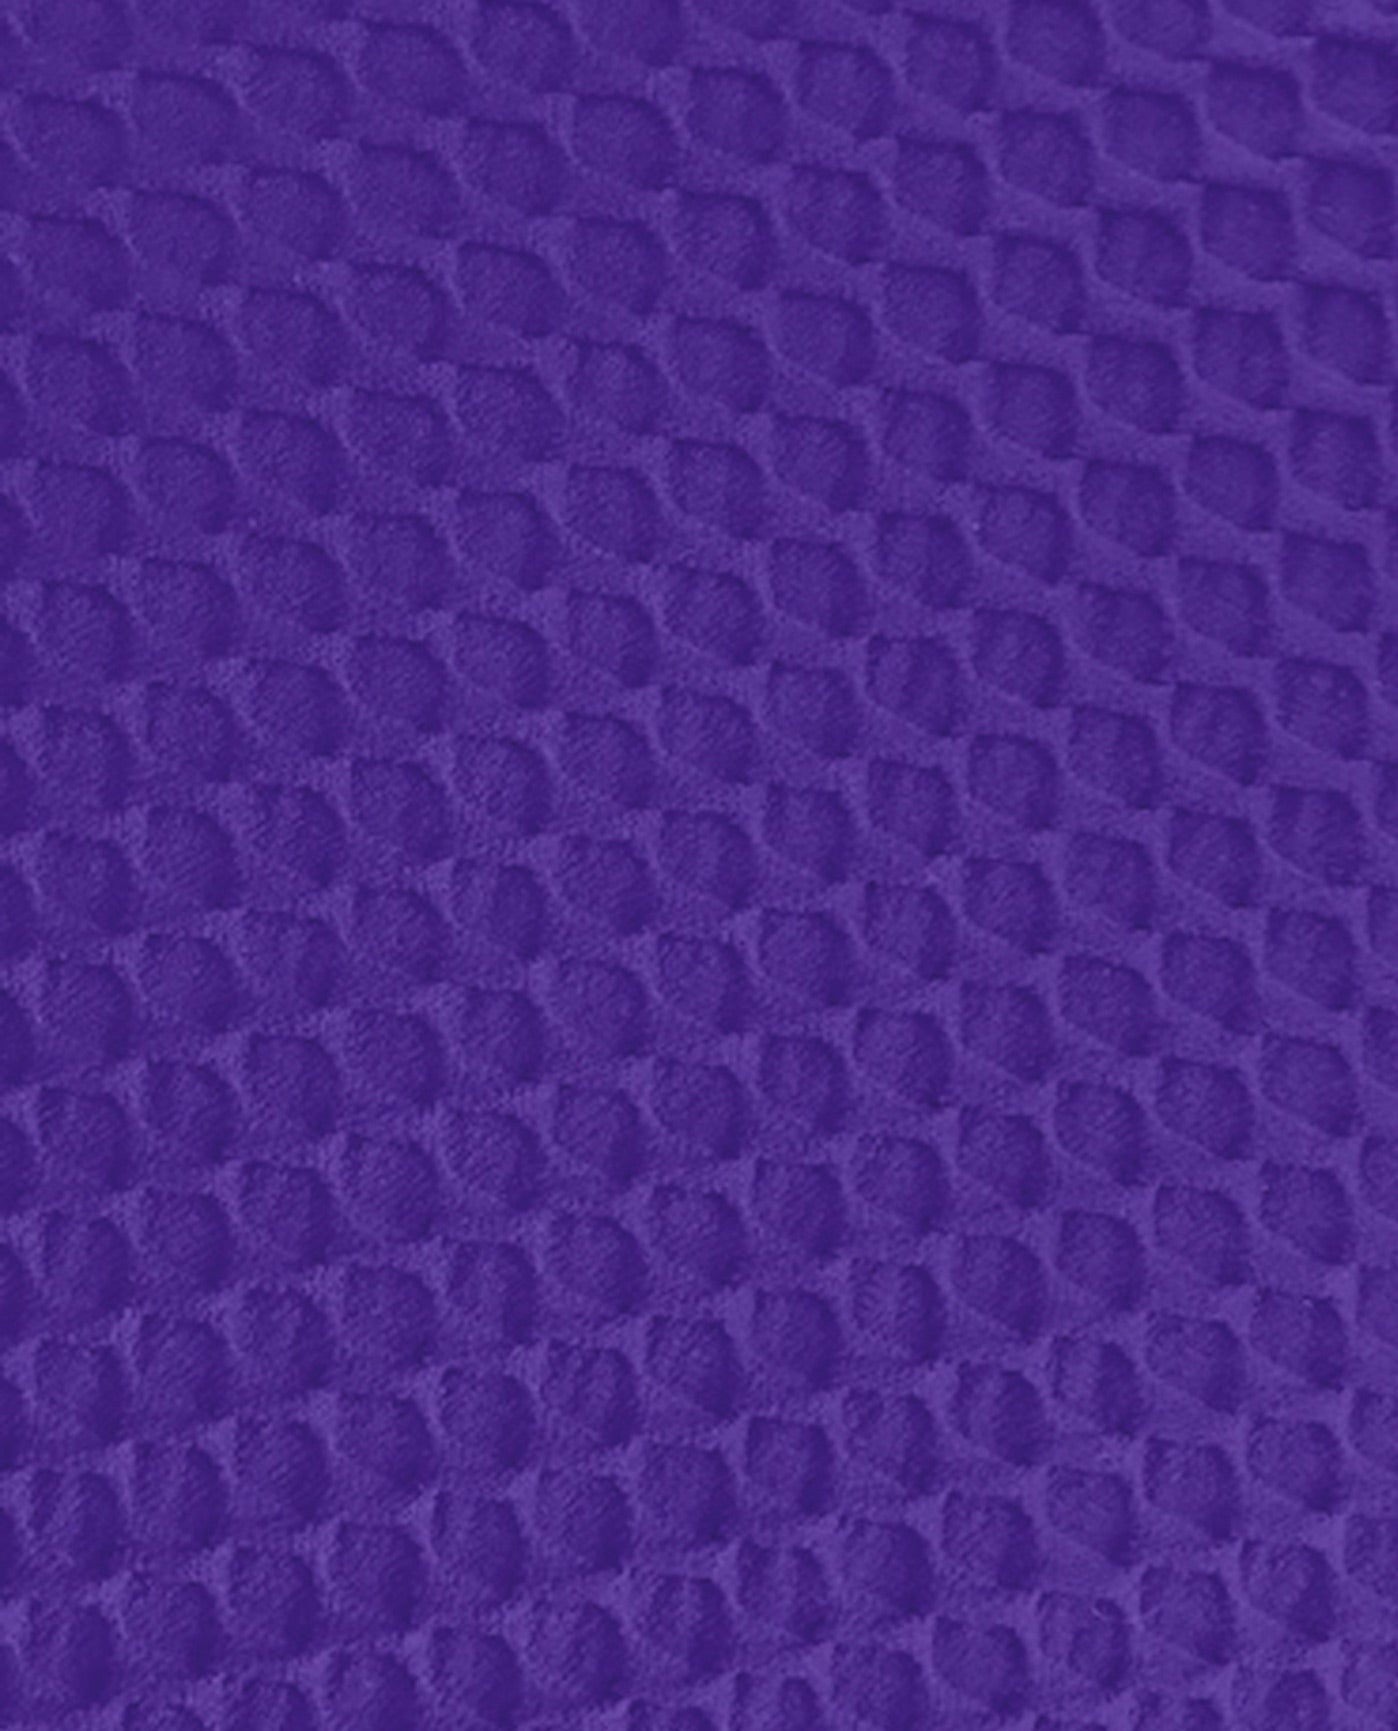 FABRIC SWATCH VIEW OF CHLORINE RESISTANT AQUAMORE COLOR BLOCK TEXTURED TWIST FRONT PLUS SIZE SWIMSUIT | 618 AQT TEXTURED PURPLE